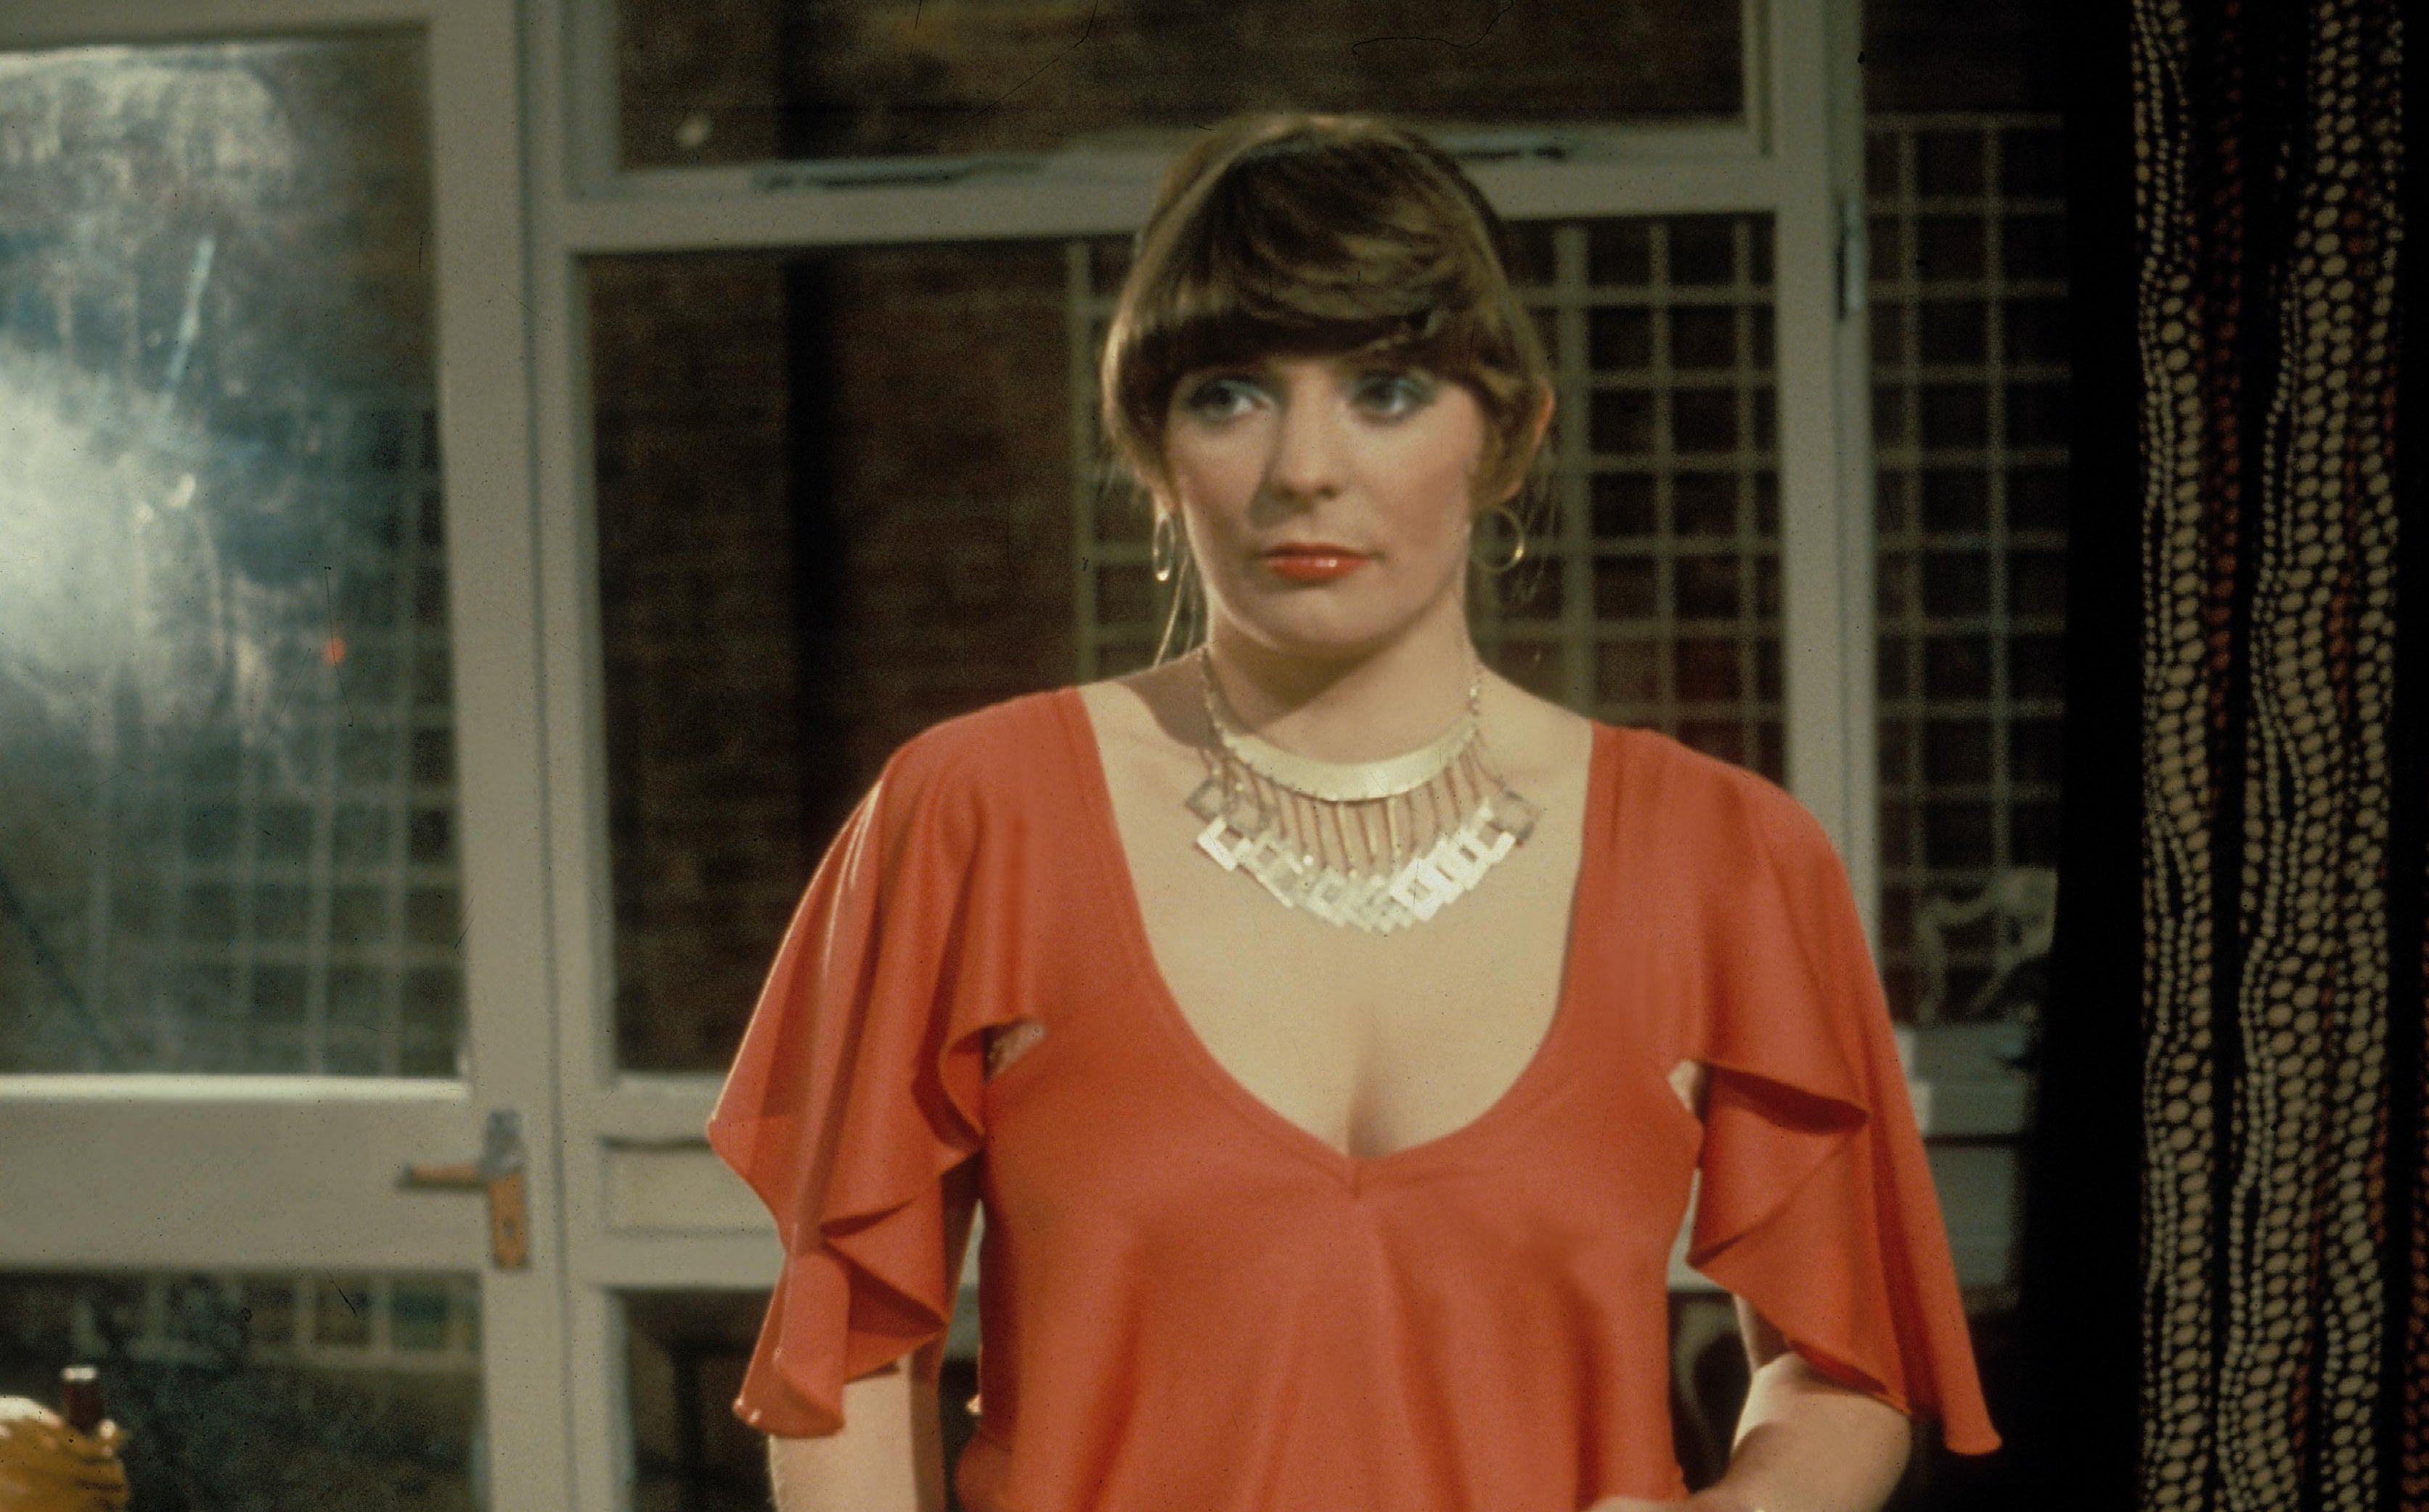 Steadman rose to fame after playing the monstrous Beverly in Mike Leigh’s ‘Abigail’s Party' in 1977